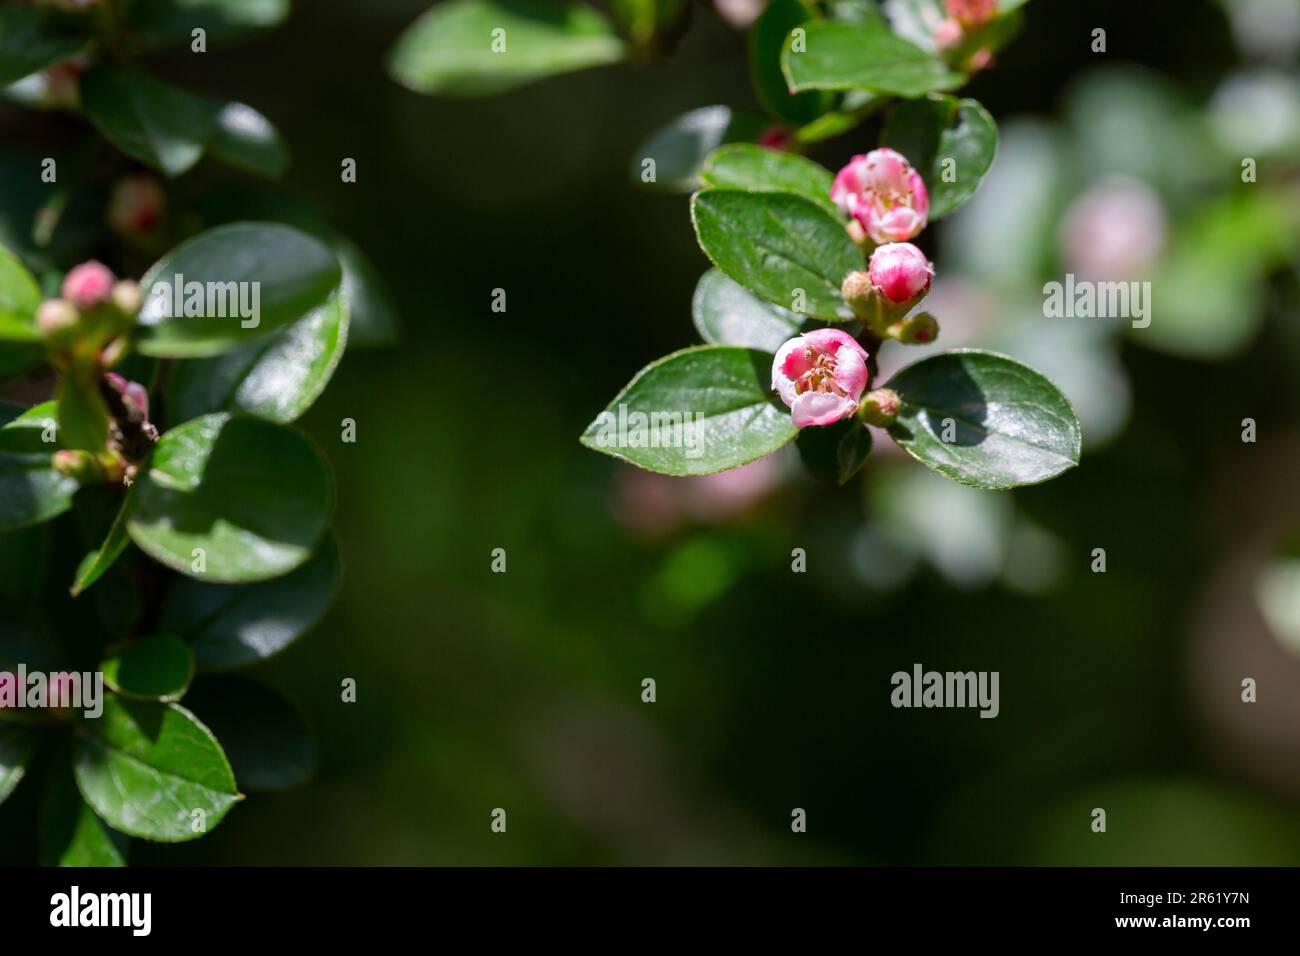 Bearberry cotoneaster Radicans white flower - Latin name - Cotoneaster dammeri Radicans, selective focus Stock Photo